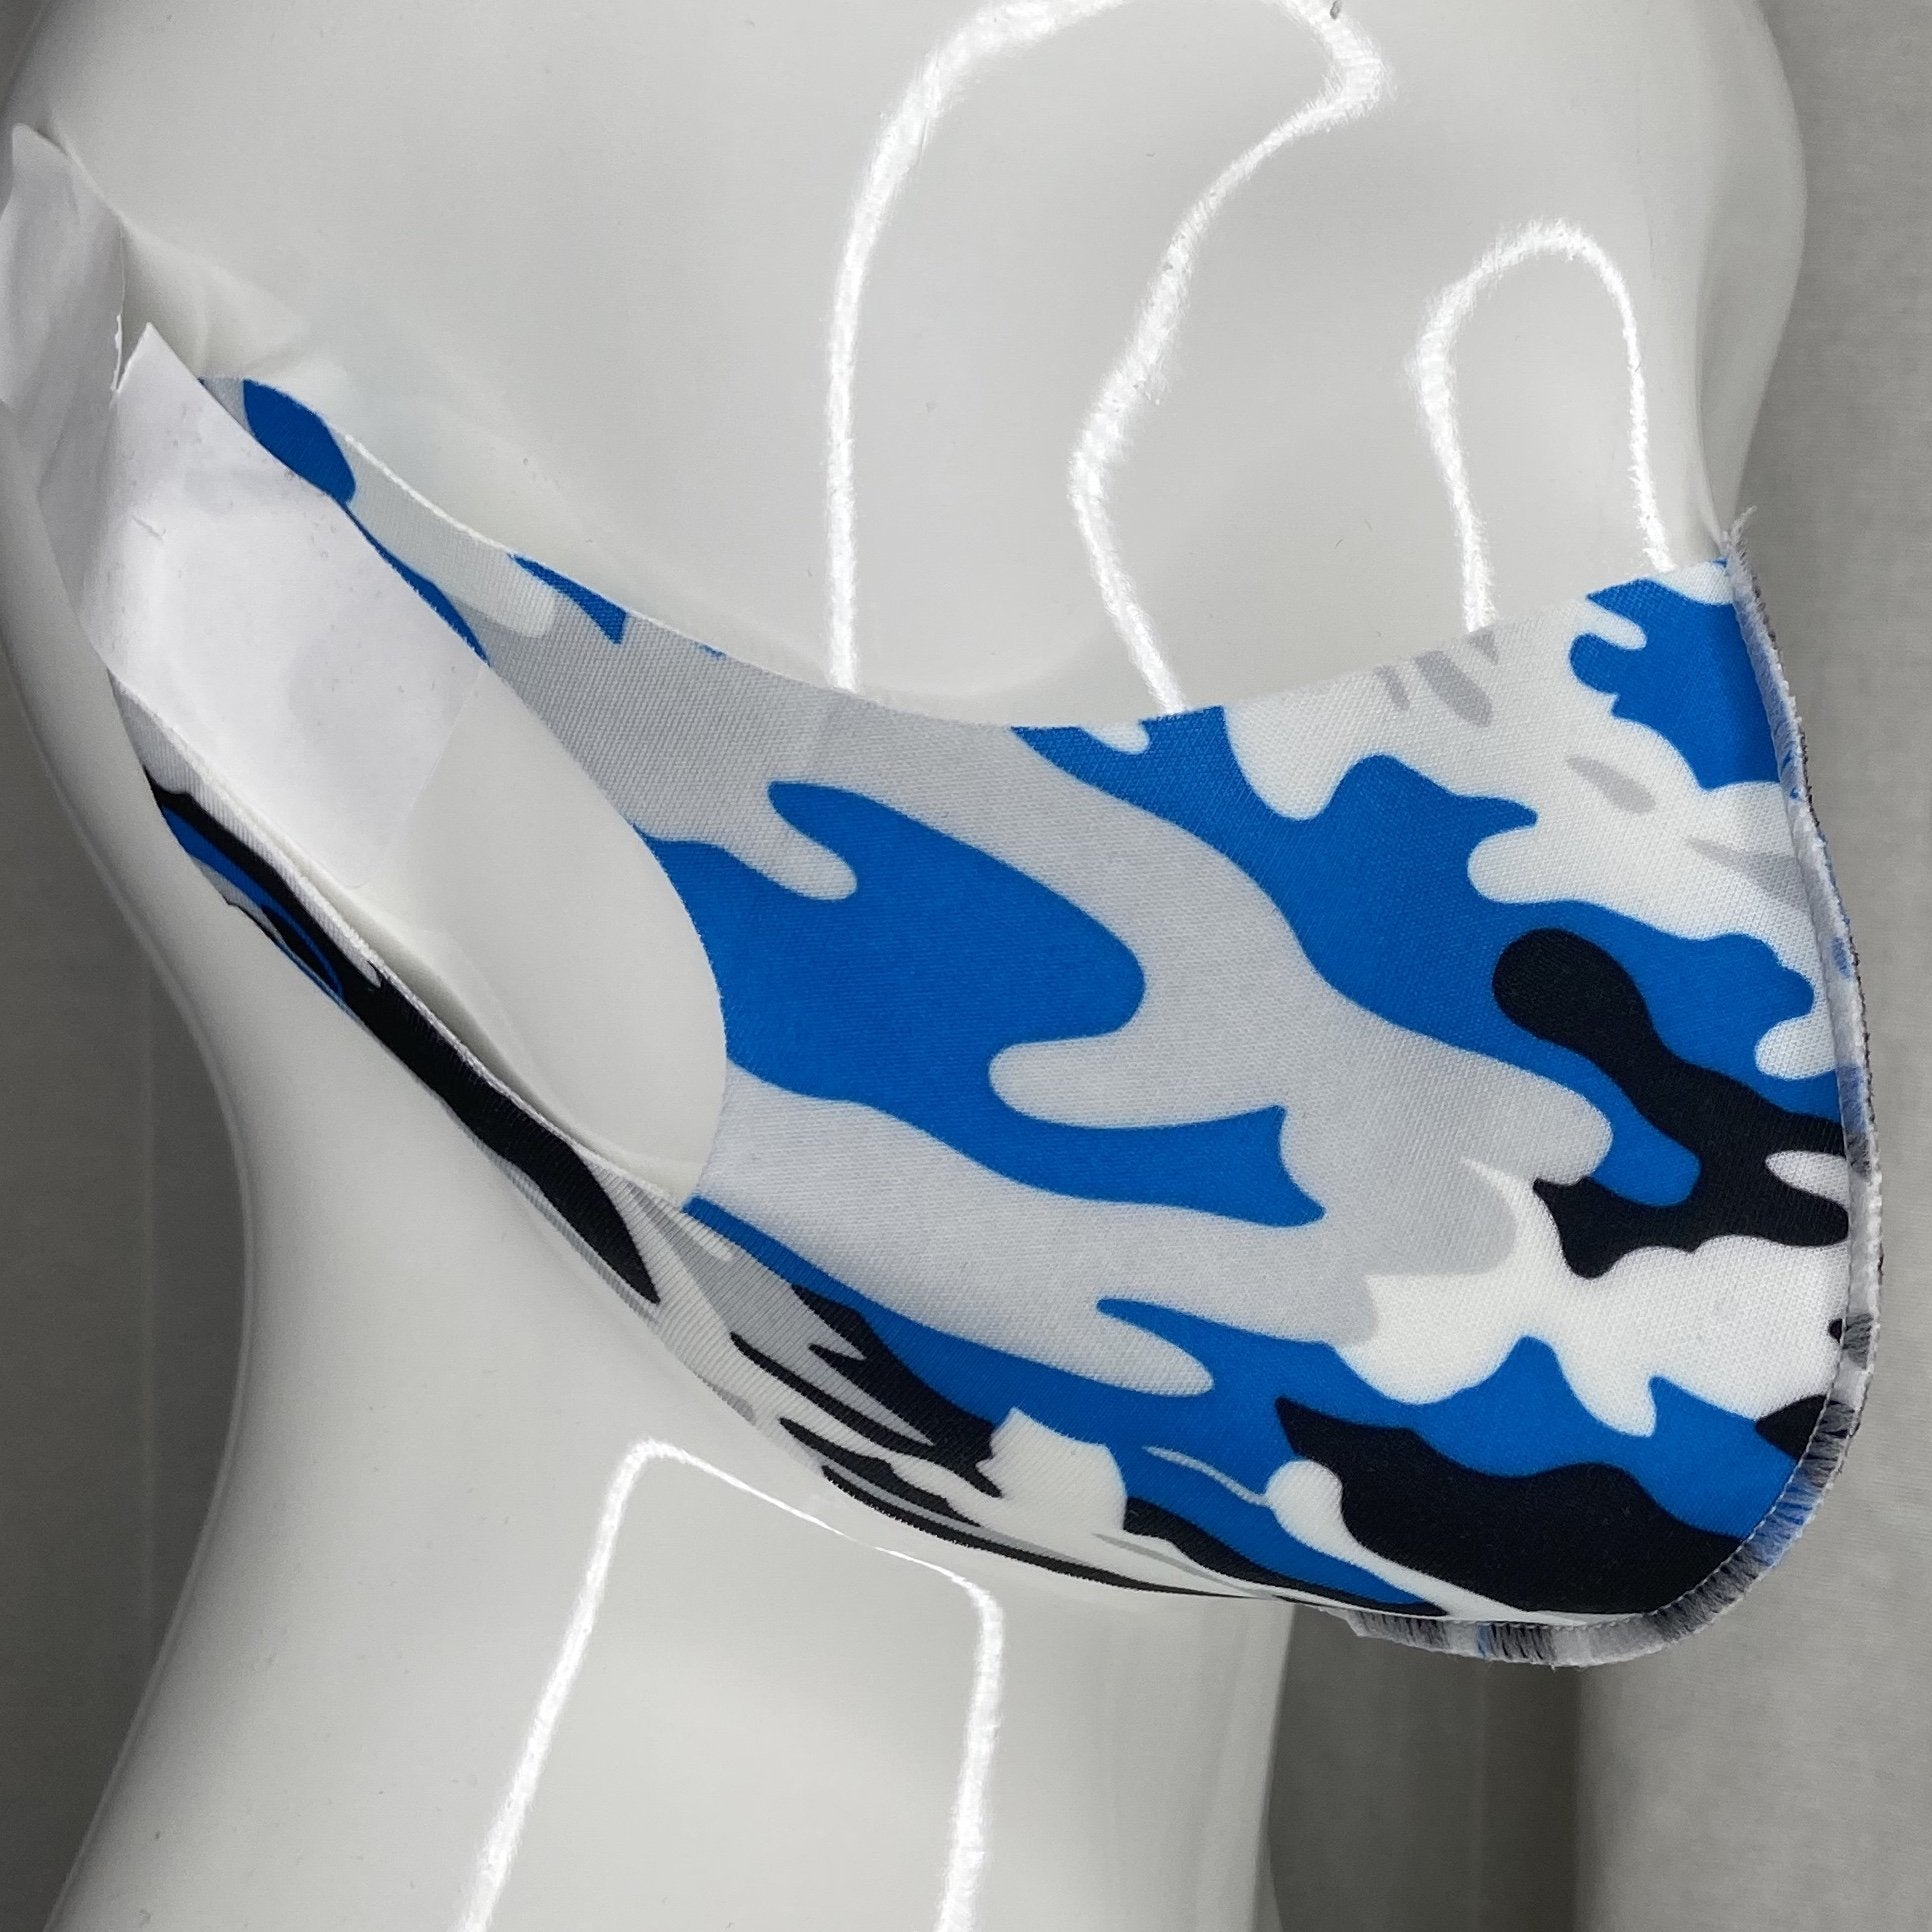 Fashion Mask (Blue Camo) In Stock-Boughie Curves-Boughie